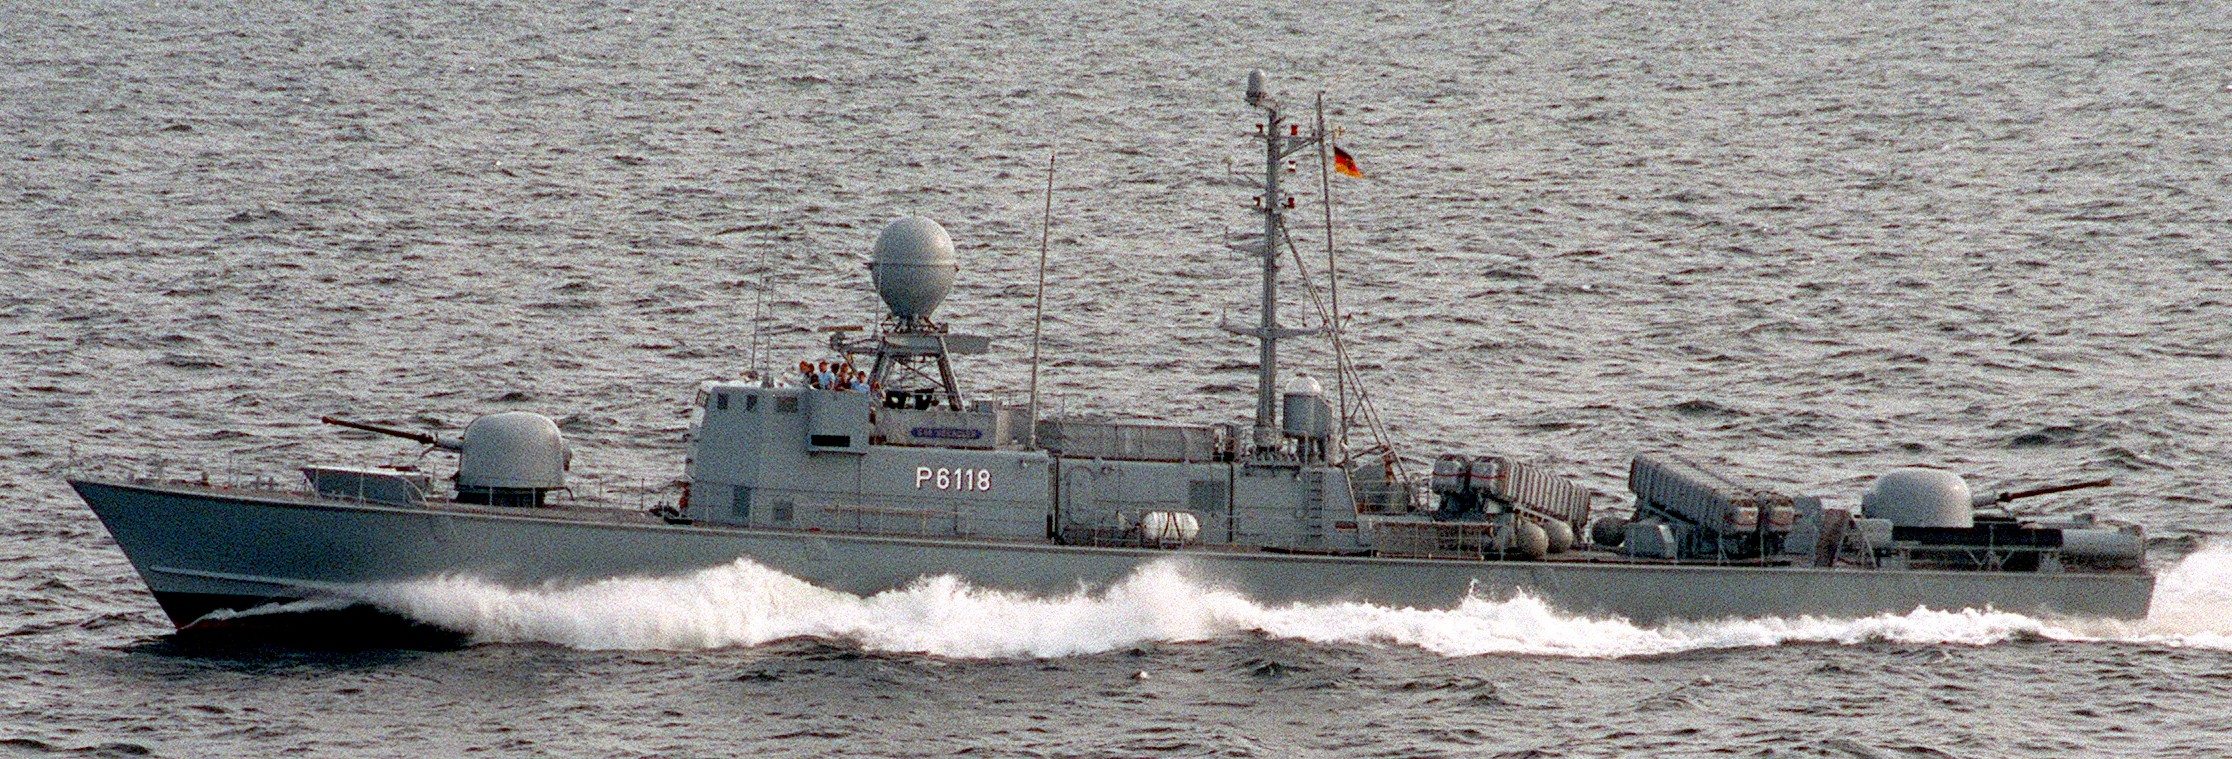 p6118 s68 fgs seeadler type 143 albatros class fast attack missile craft boat german navy 03